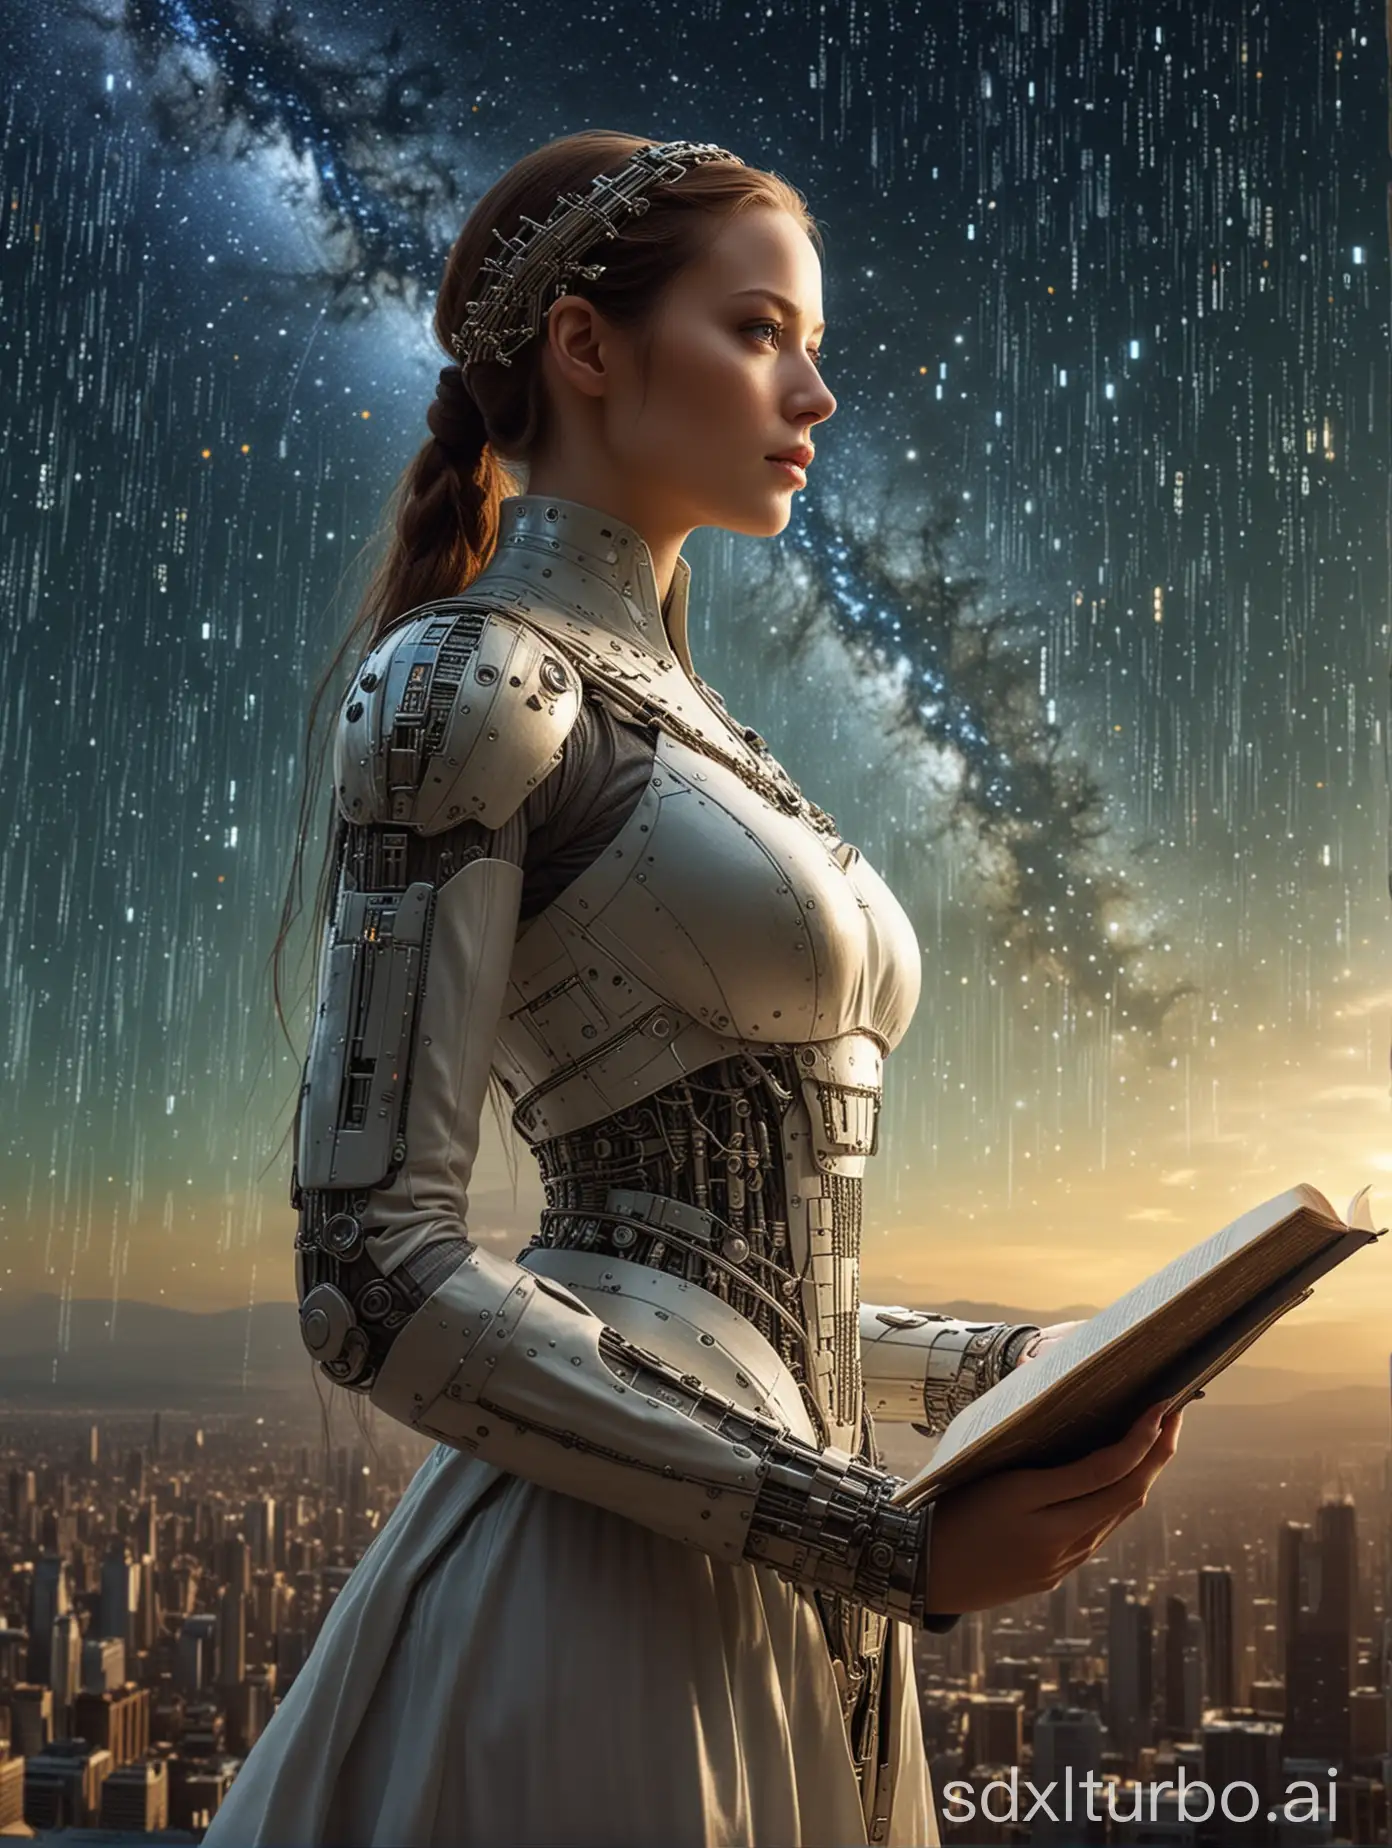 A beautiful android woman from the future looks towards the stars; the sky is composed of binary numbers like in The Matrix, watching her dream come true, reading an ancient book from the 1400s.